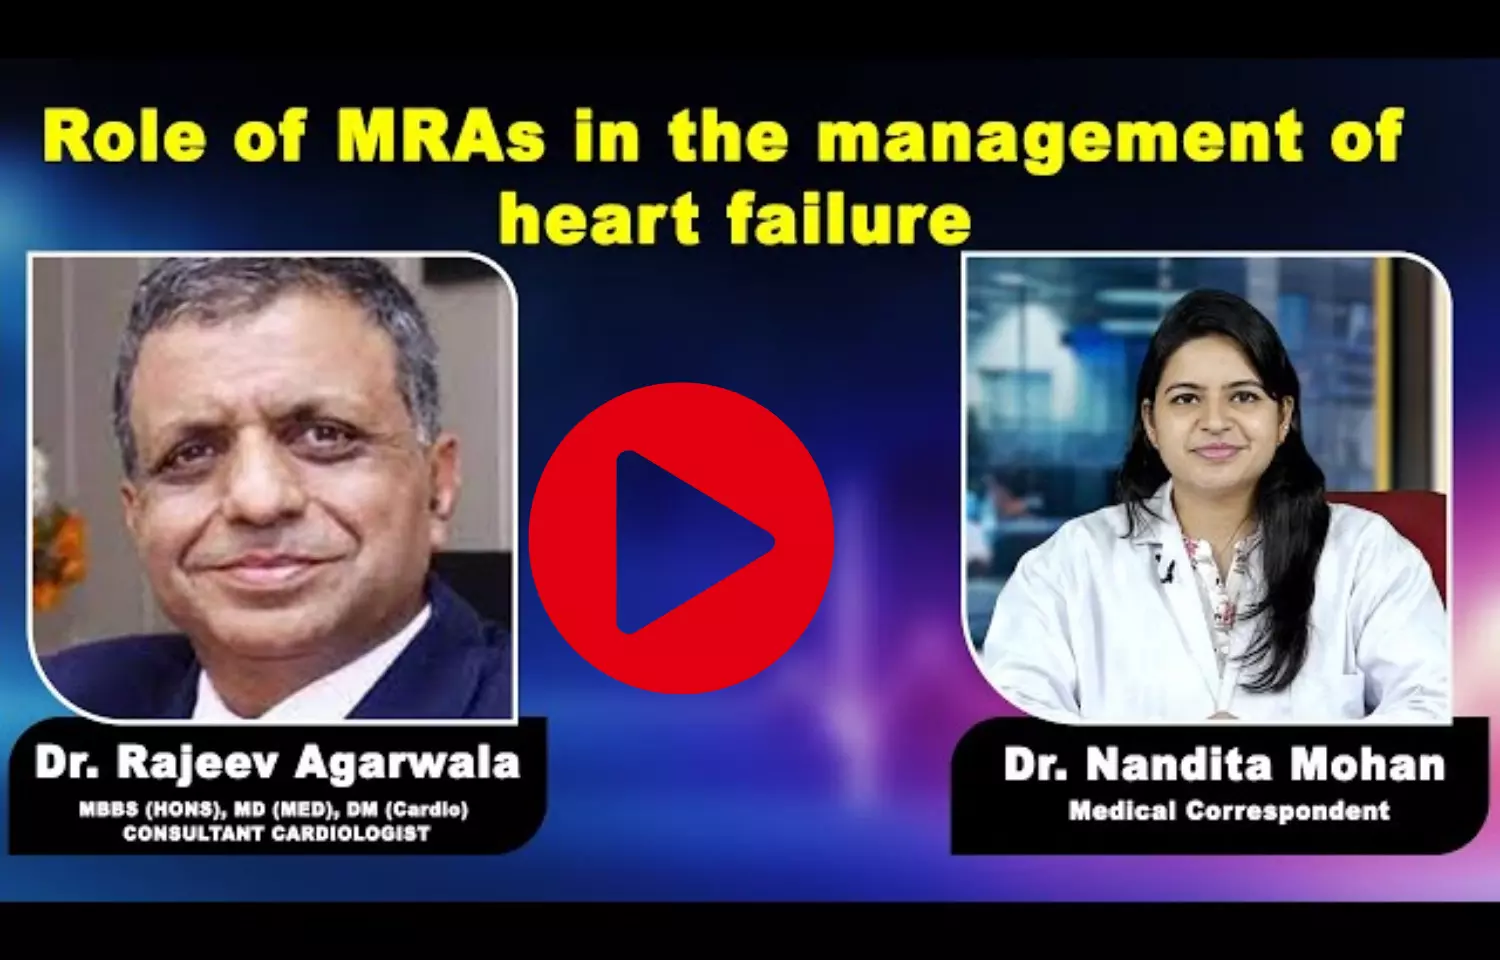 Understanding the role of MRAs in management of heart failure with Cardiologist Dr Rajeev Agarwala